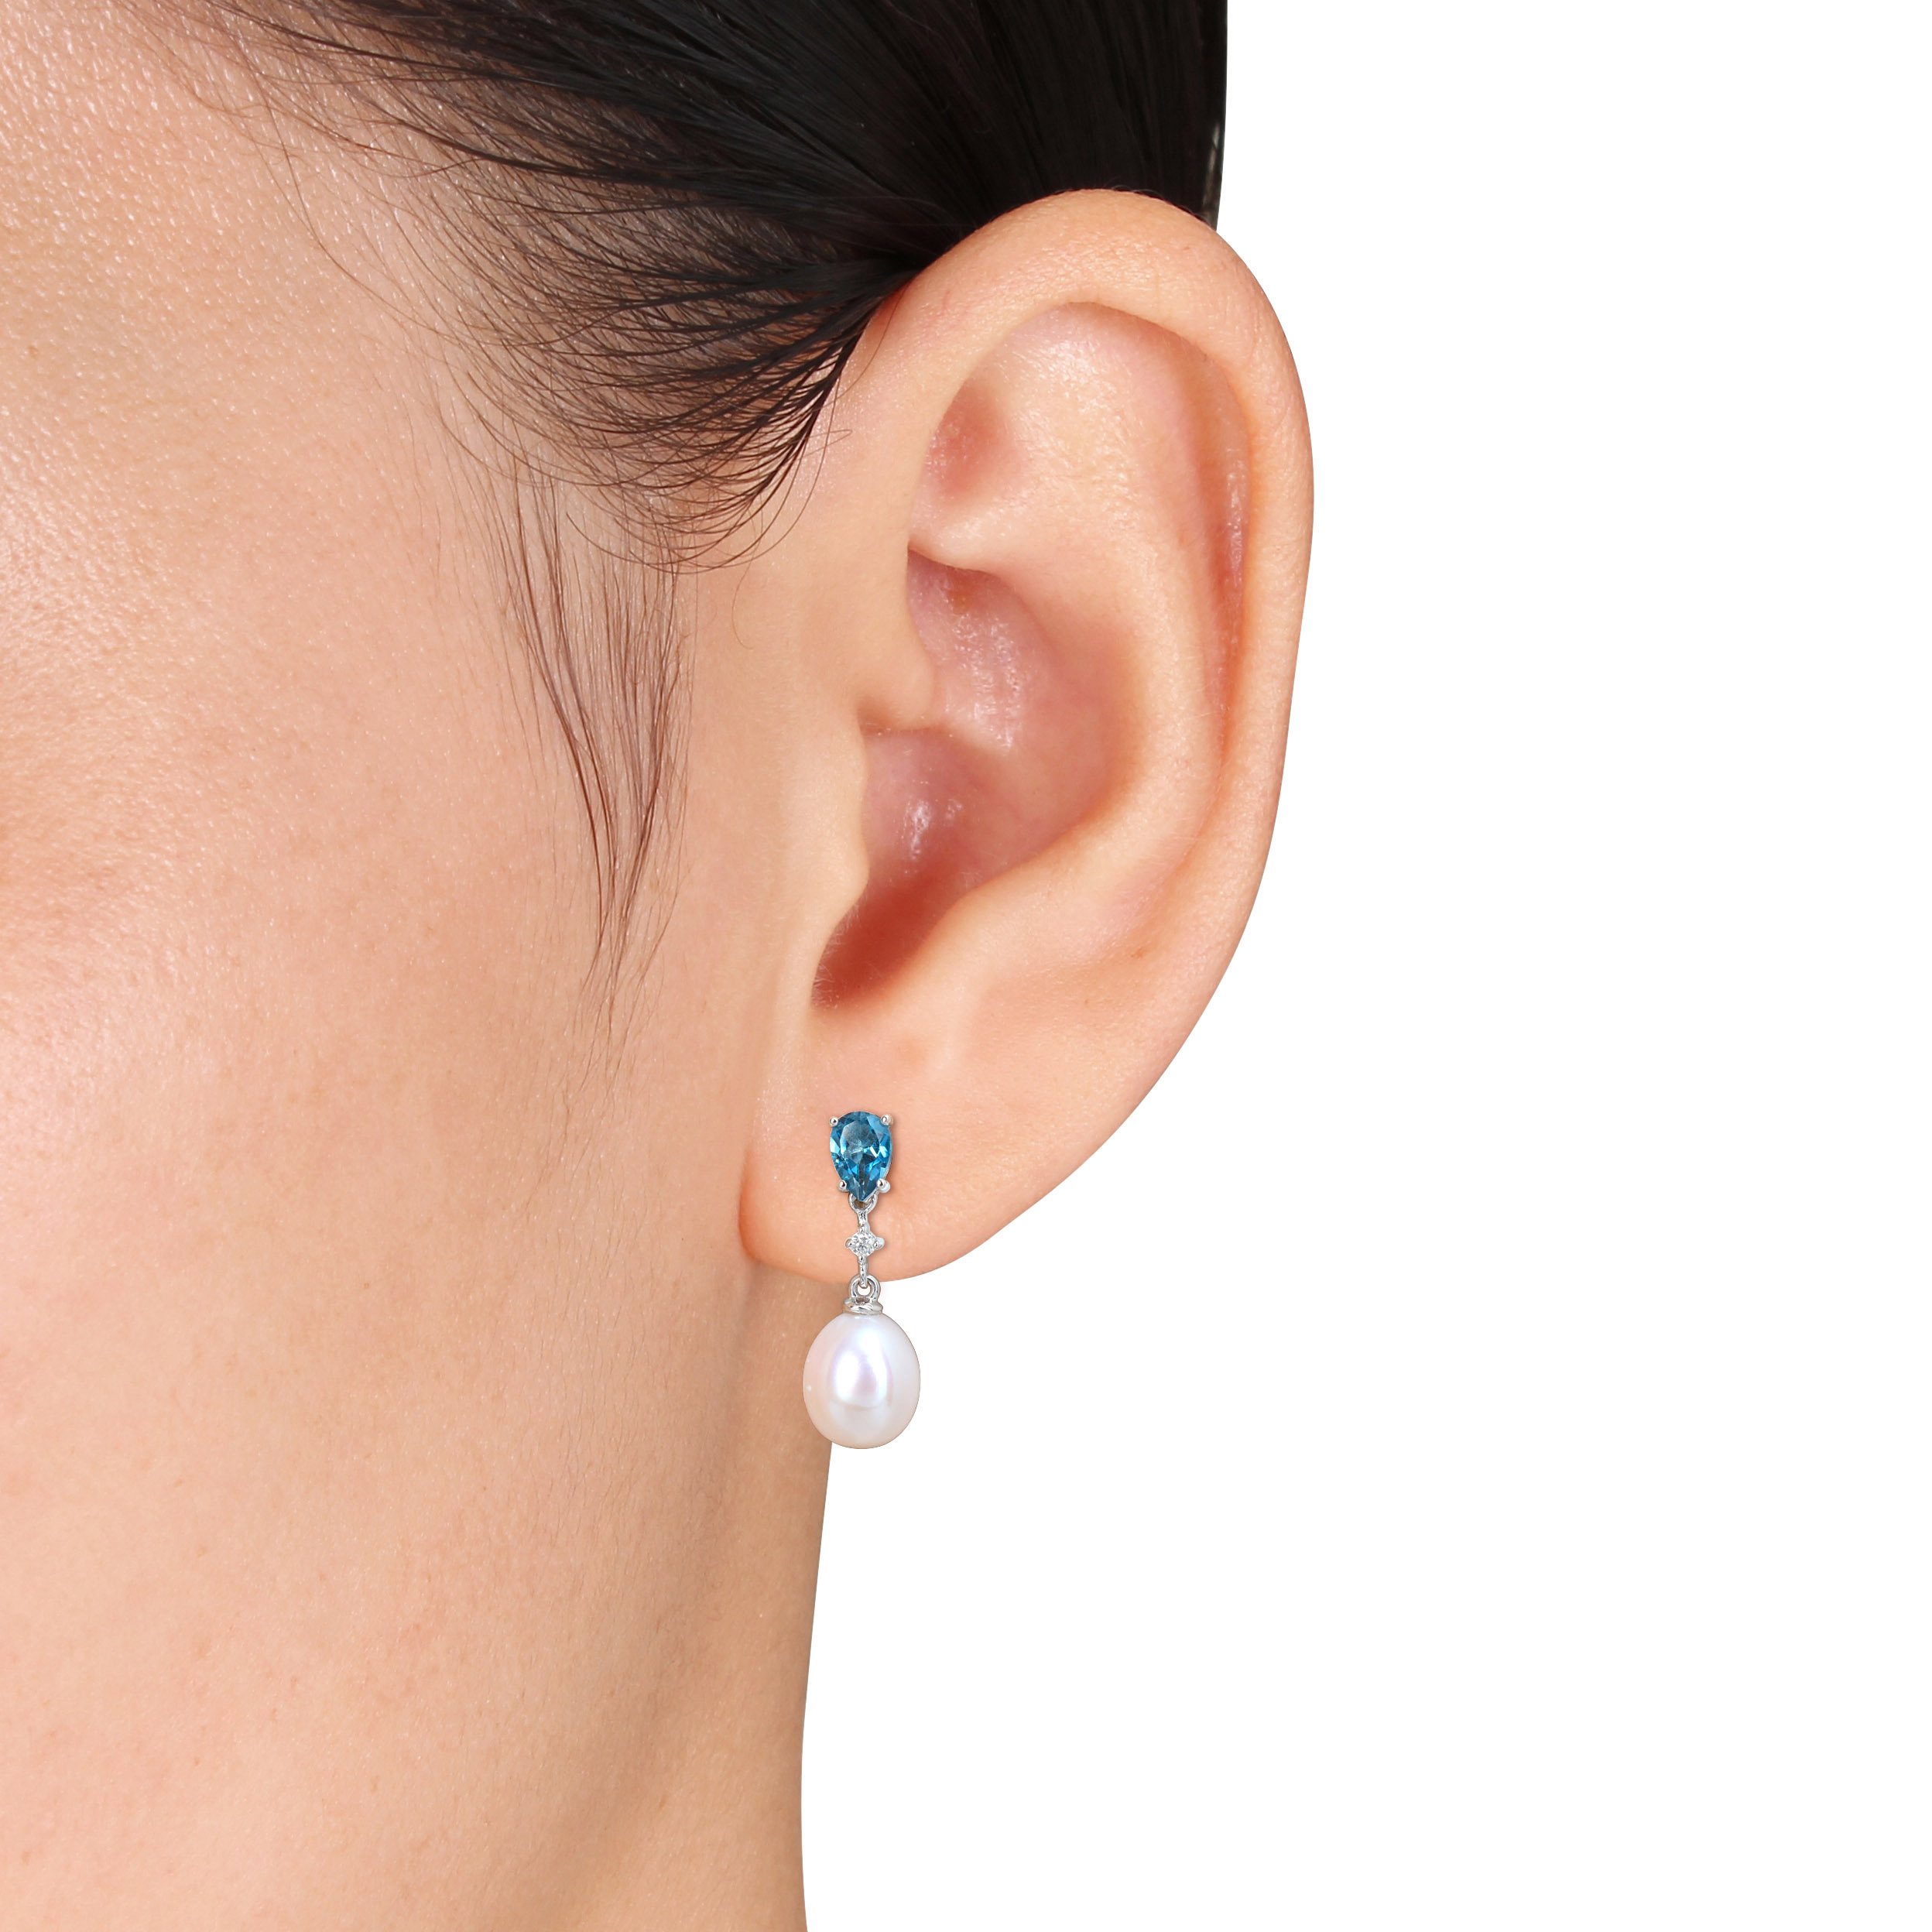 8-8.5 MM Freshwater Cultured Pearl 1 CT TGW Pear-Cut London Blue Topaz and Diamond Accent Drop Earrings in 10k White Gold